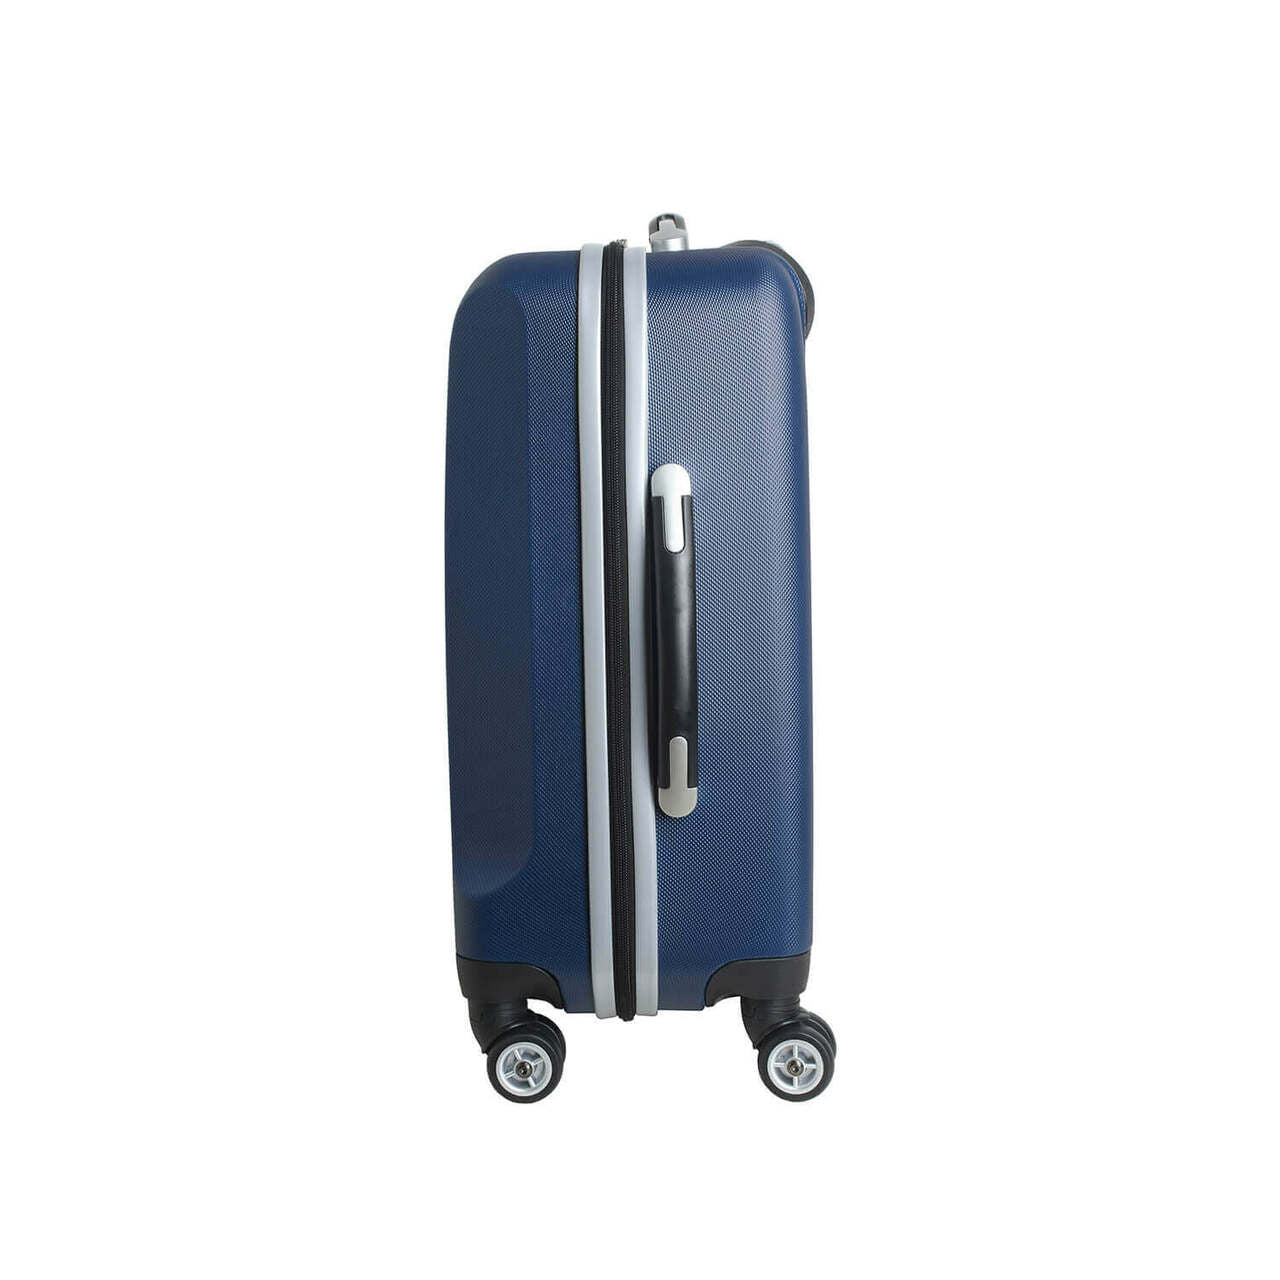 Personalized Initial Name letter "M" 20 inches Carry on Hardcase Spinner Luggage by Mojo in NAVY